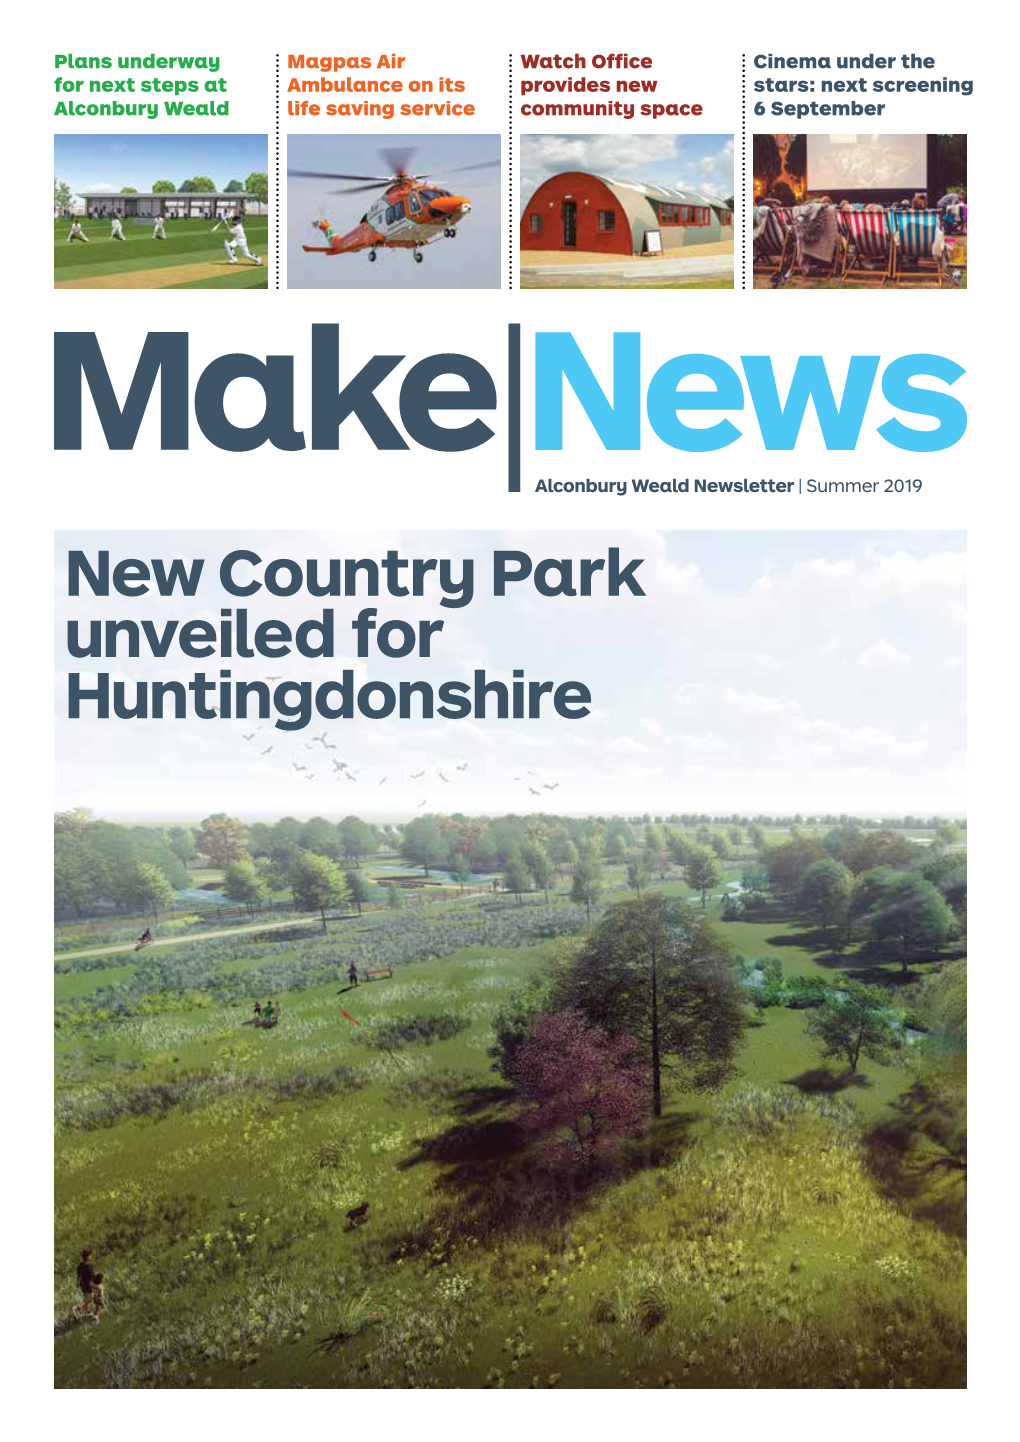 New Country Park Unveiled for Huntingdonshire